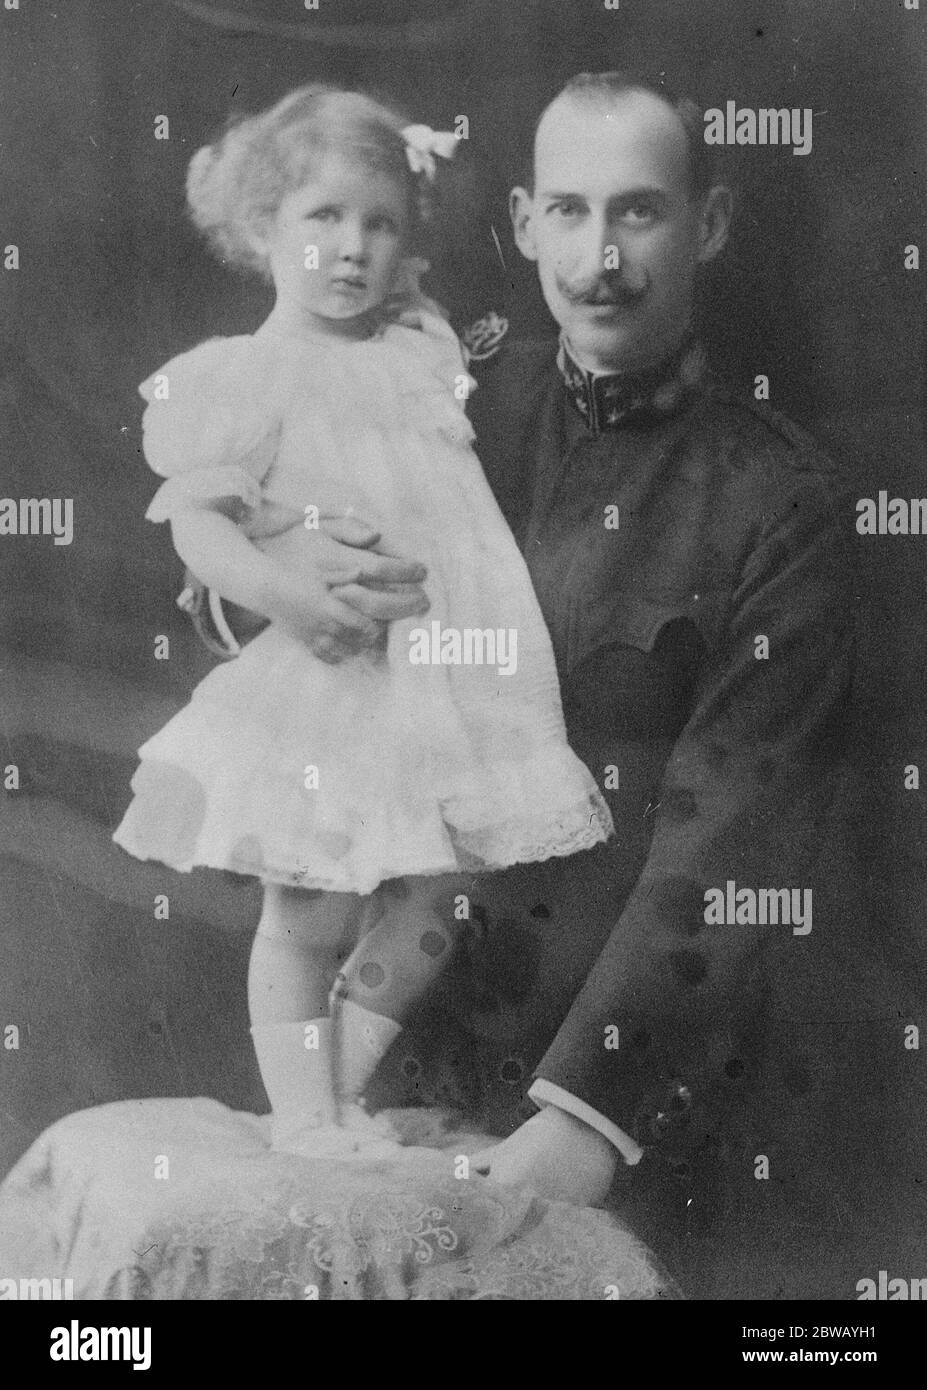 Prince Nicholas of Greece , brother of Prince Andrew who is leaving Greece with his family to settle in Switzerland 7 December 1922 Prince Nicholas of Greece and Denmark ( 22 January 1872 - 8 February 1938 ) The child in this photograph looks very much like Princess Olga as a toddler / very young girl - it is likely that this photograph was actually taken in the early 1900s - and the appearance of Prince Nicholas in this photograph matches other photographs of him taken in eg 1902. Stock Photo